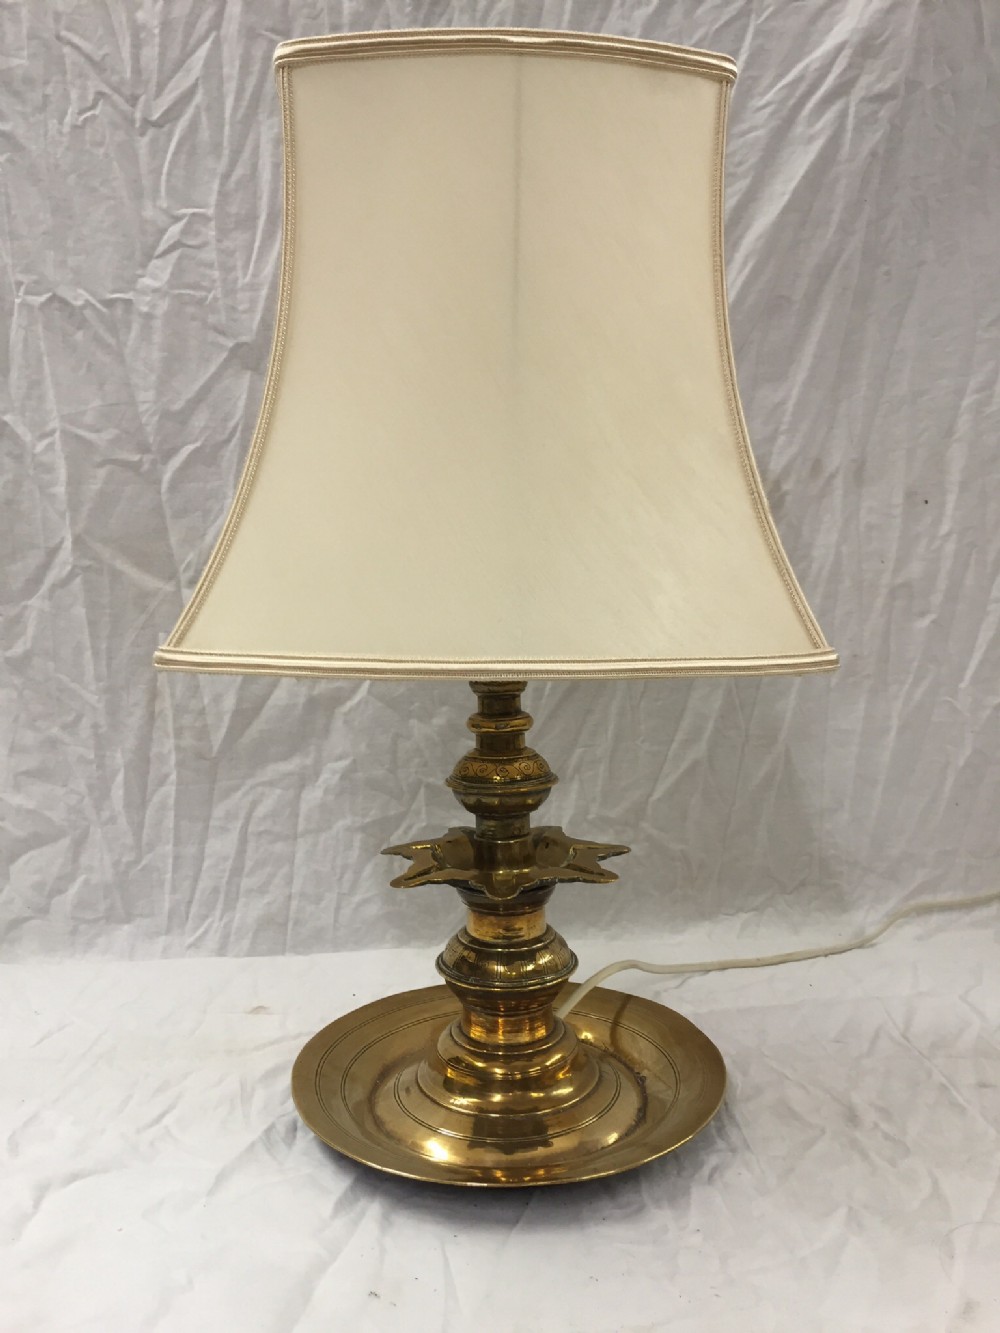 c18th indian candlestick lamp converted to table lamp